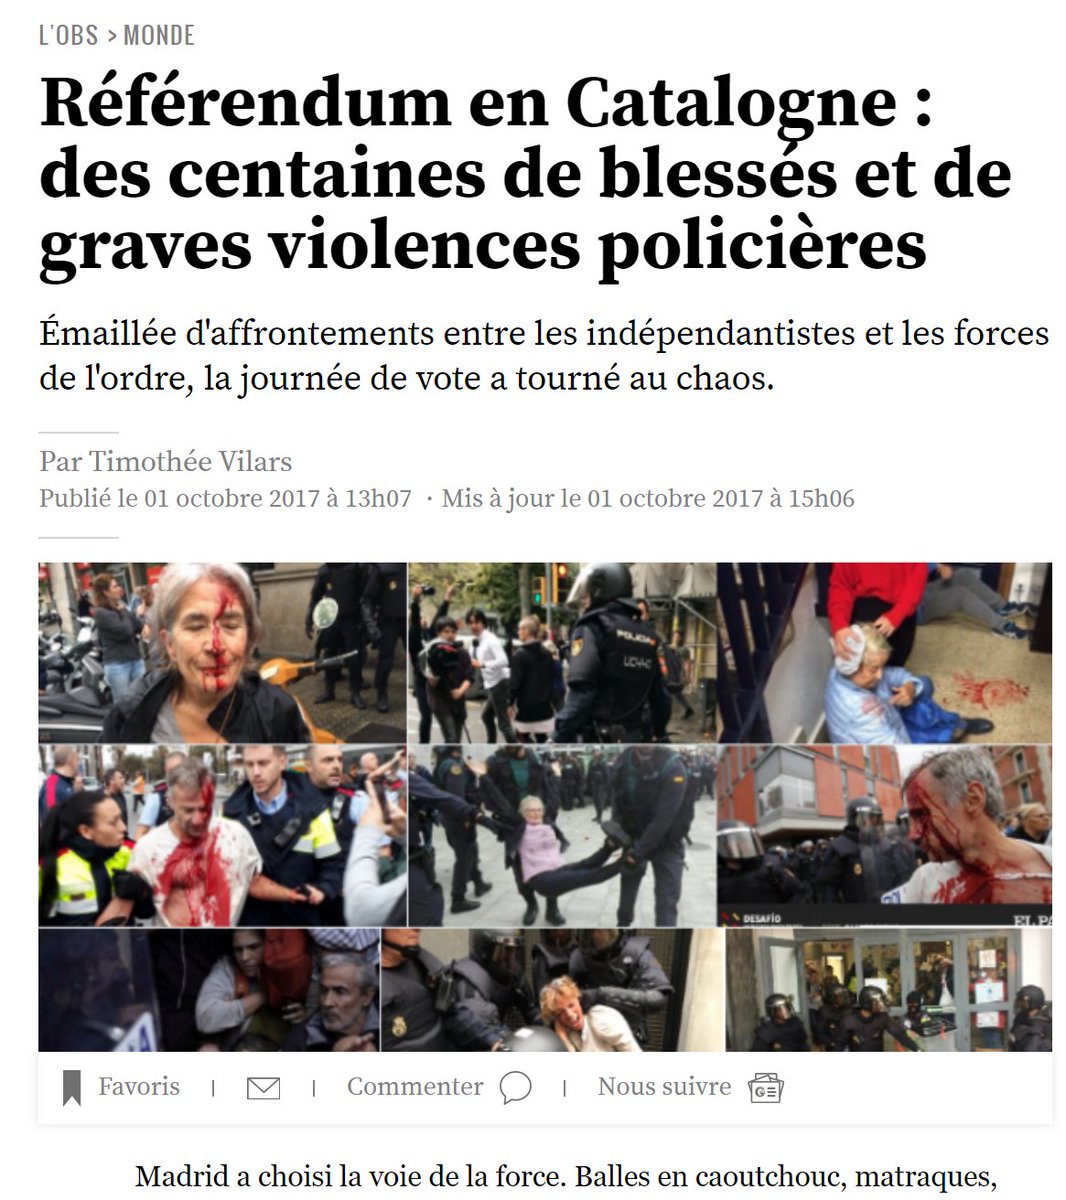 Dear  @EP_President, it is difficult for the EU to be credible before the Lukashenko regime. Watch this video and images. You will see the Spanish police use extreme violence against people trying to vote in a self-determination referendum.  https://twitter.com/EP_President/status/1293851973280825345